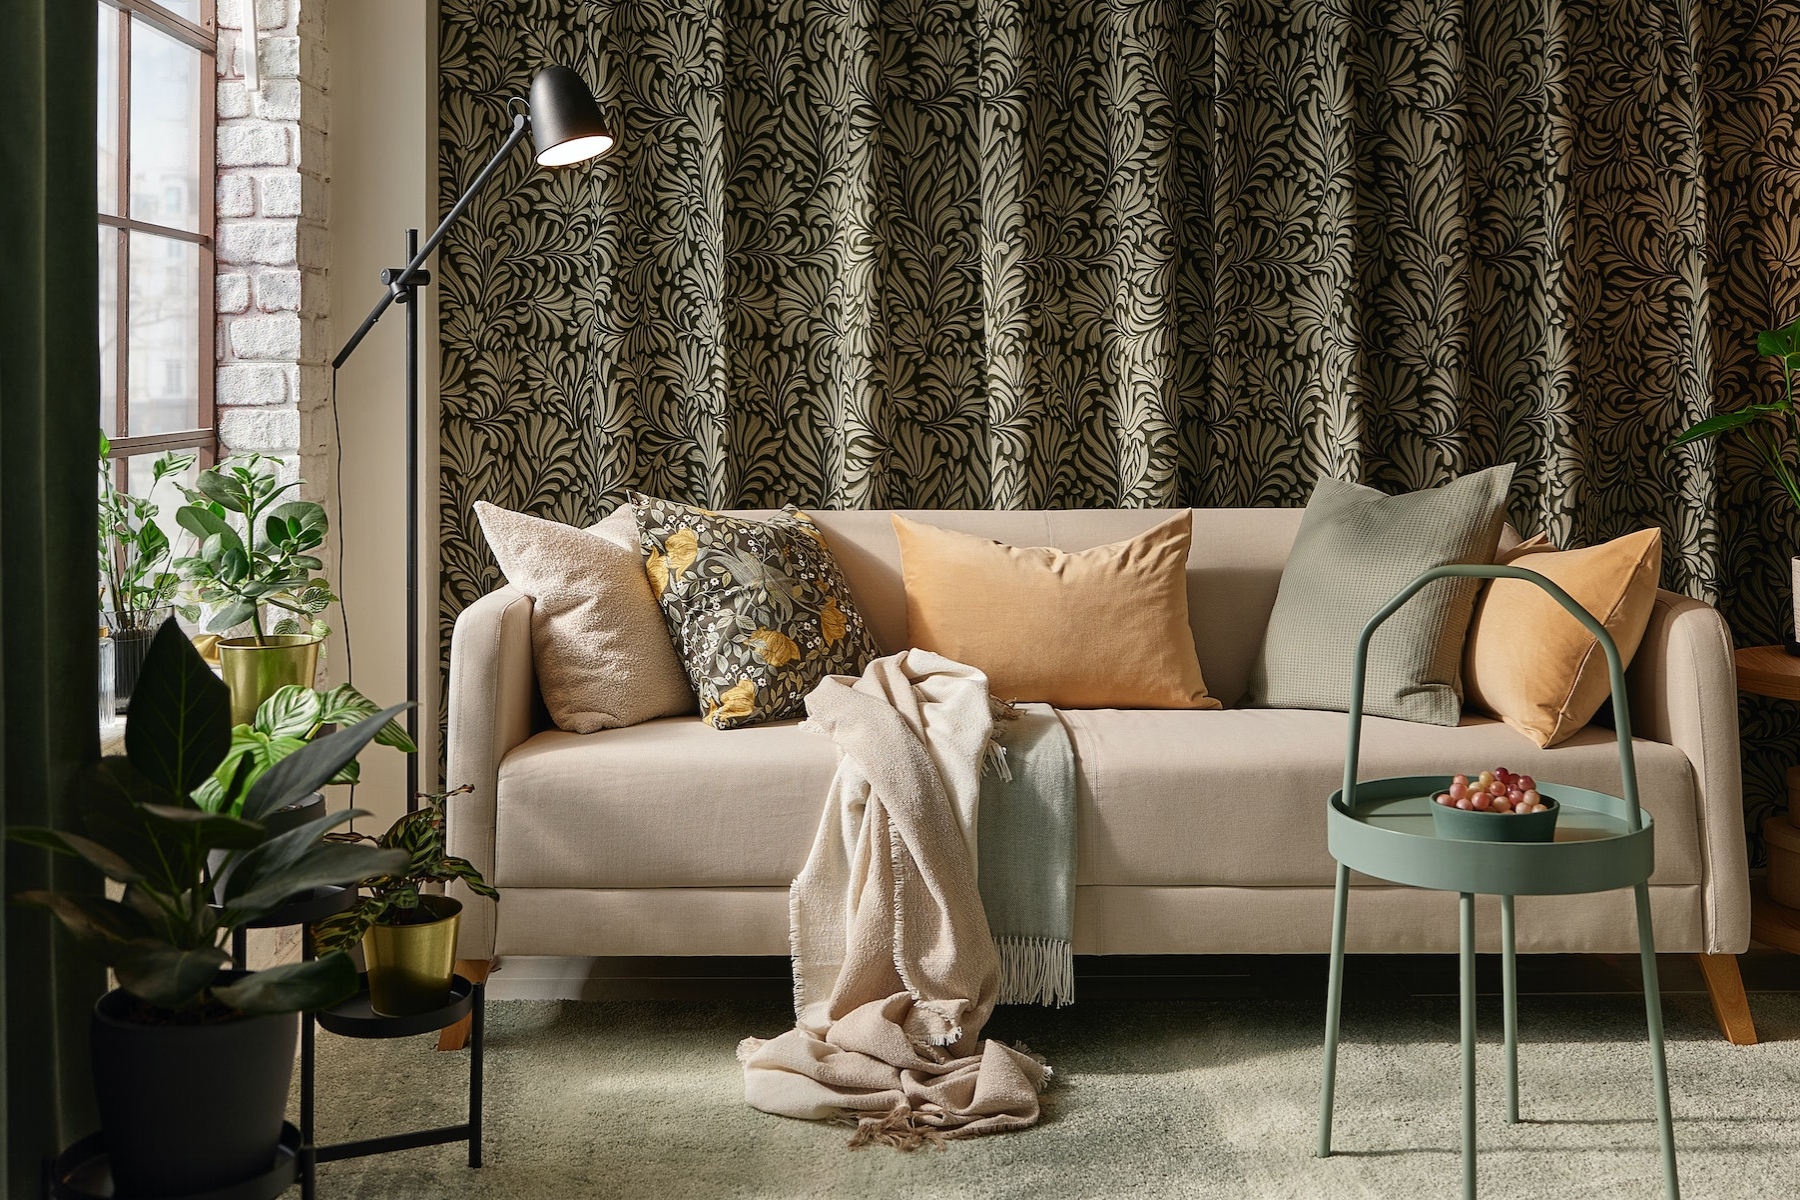 IKEA - Easy ways to refresh your living room with textiles